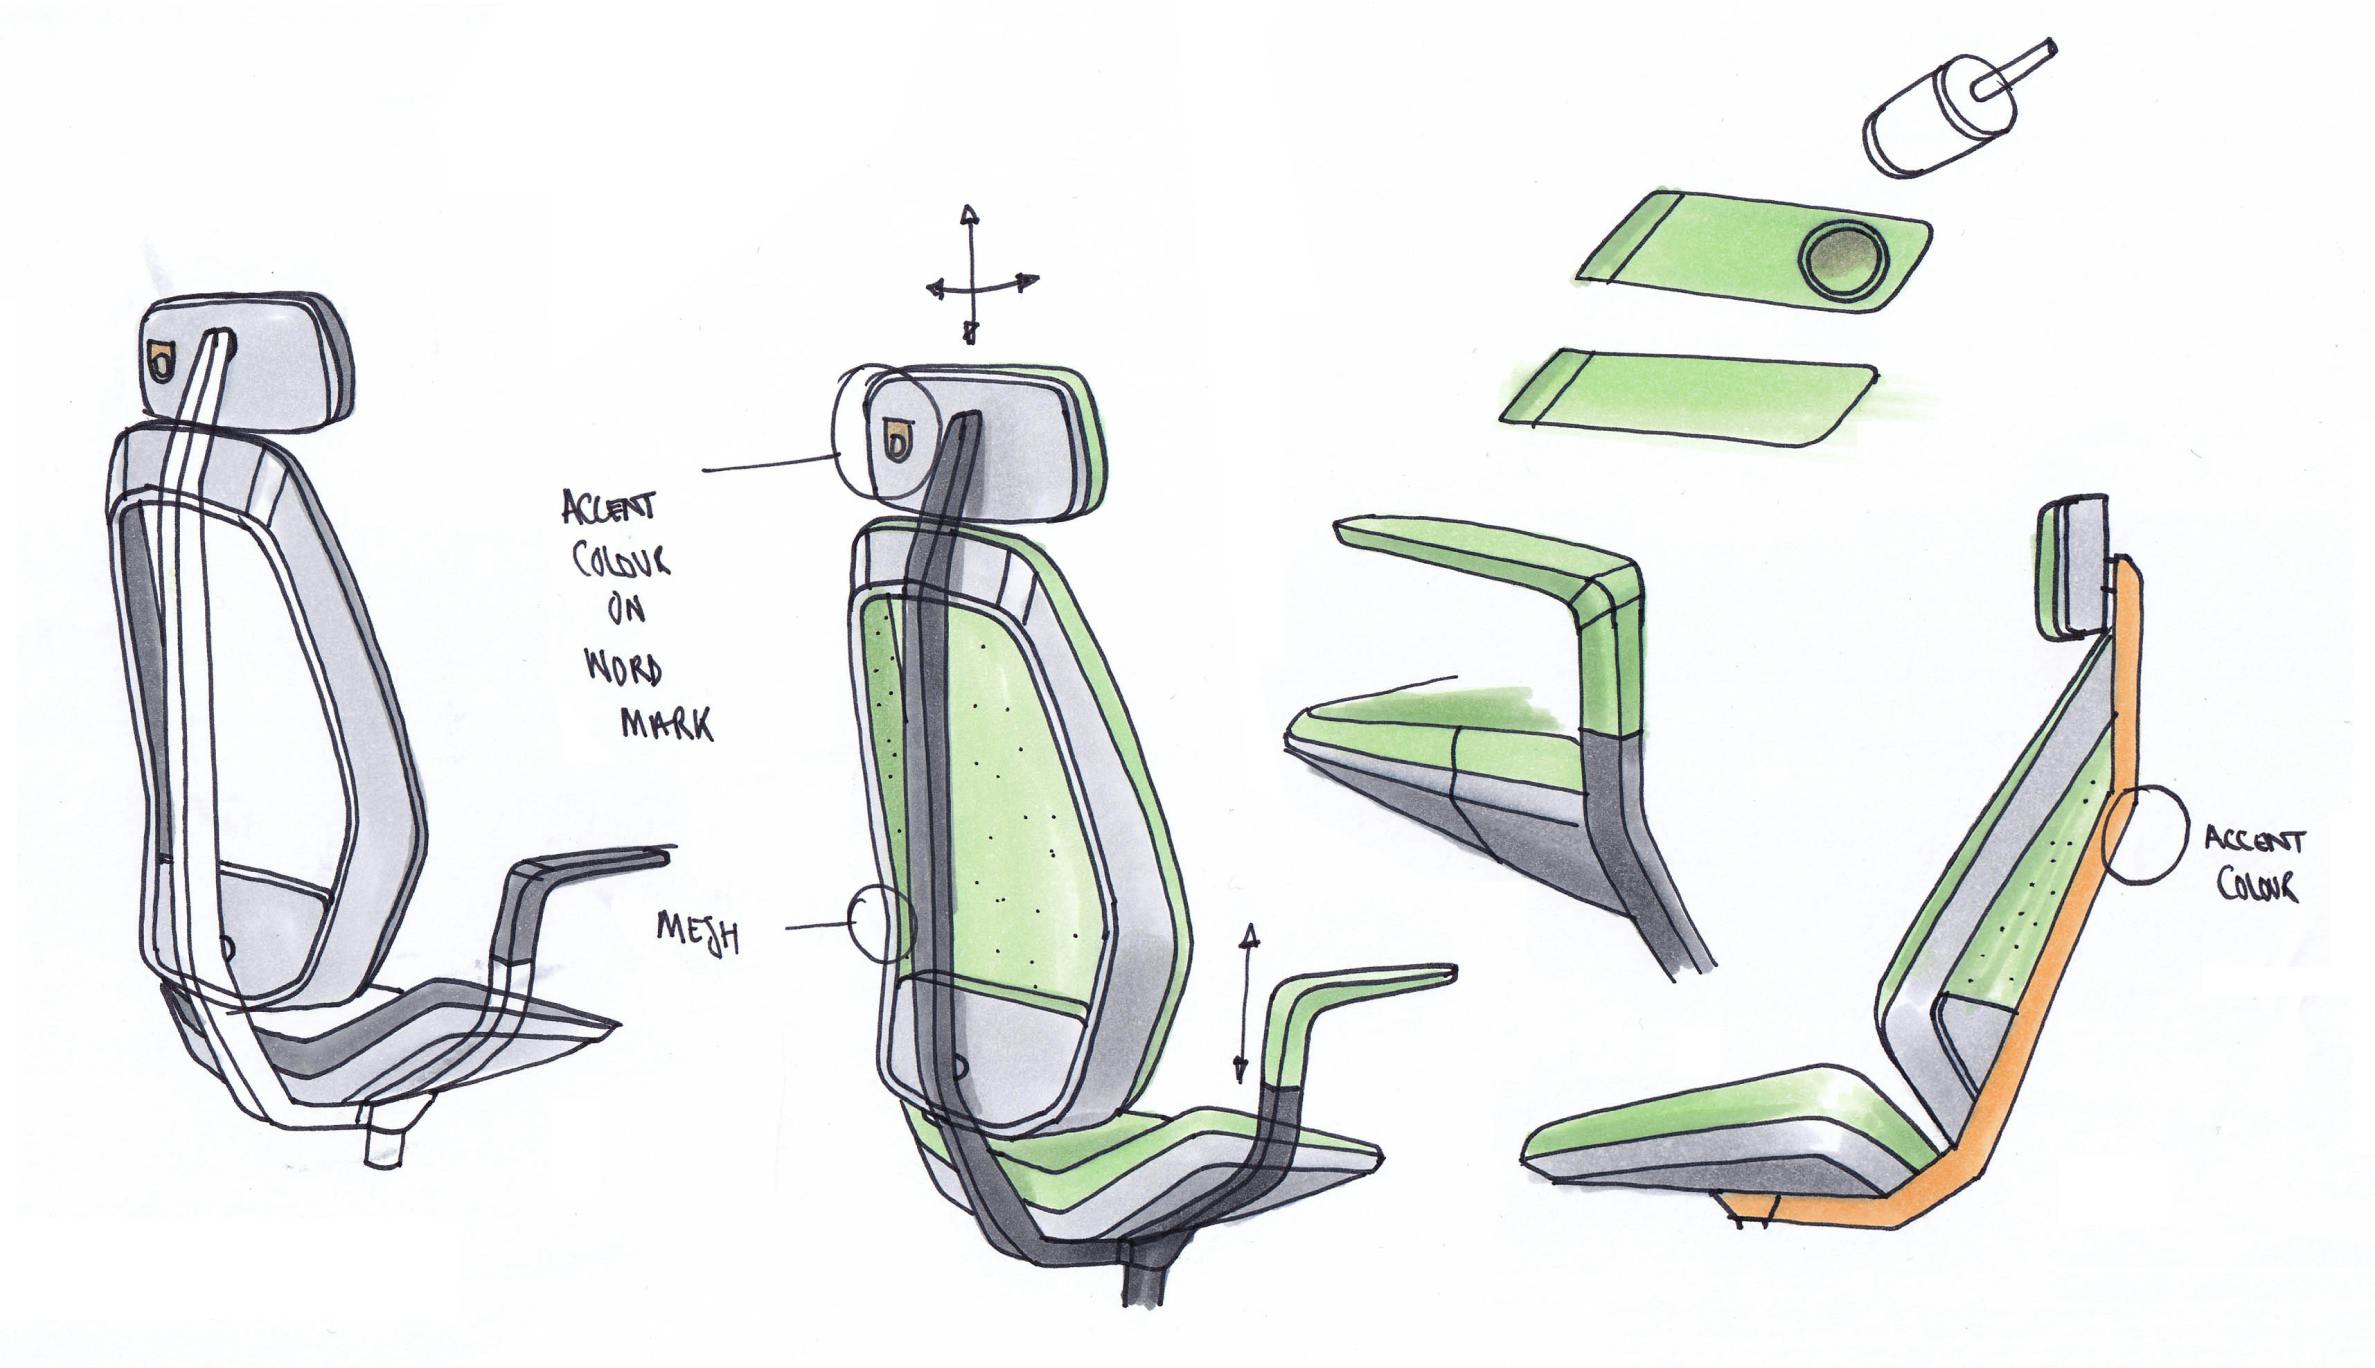 Gaming chair sketches